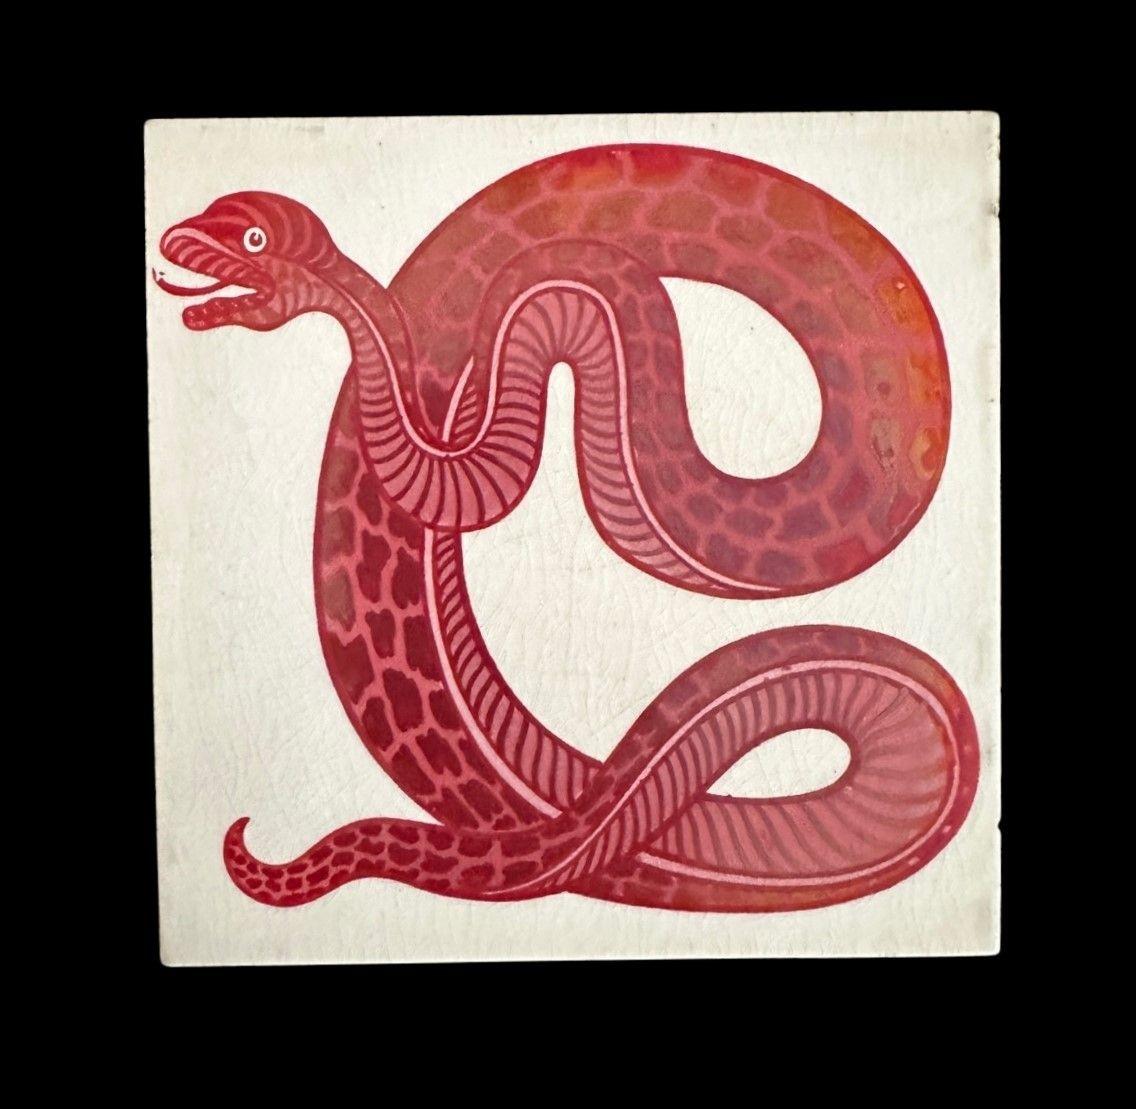 5448
Scarce Ruby Lustre Tile crisply decorated with a Snake with a protruding tongue and a strong firing
1888 - 97
15.2cm x 15.2cm x 1cm